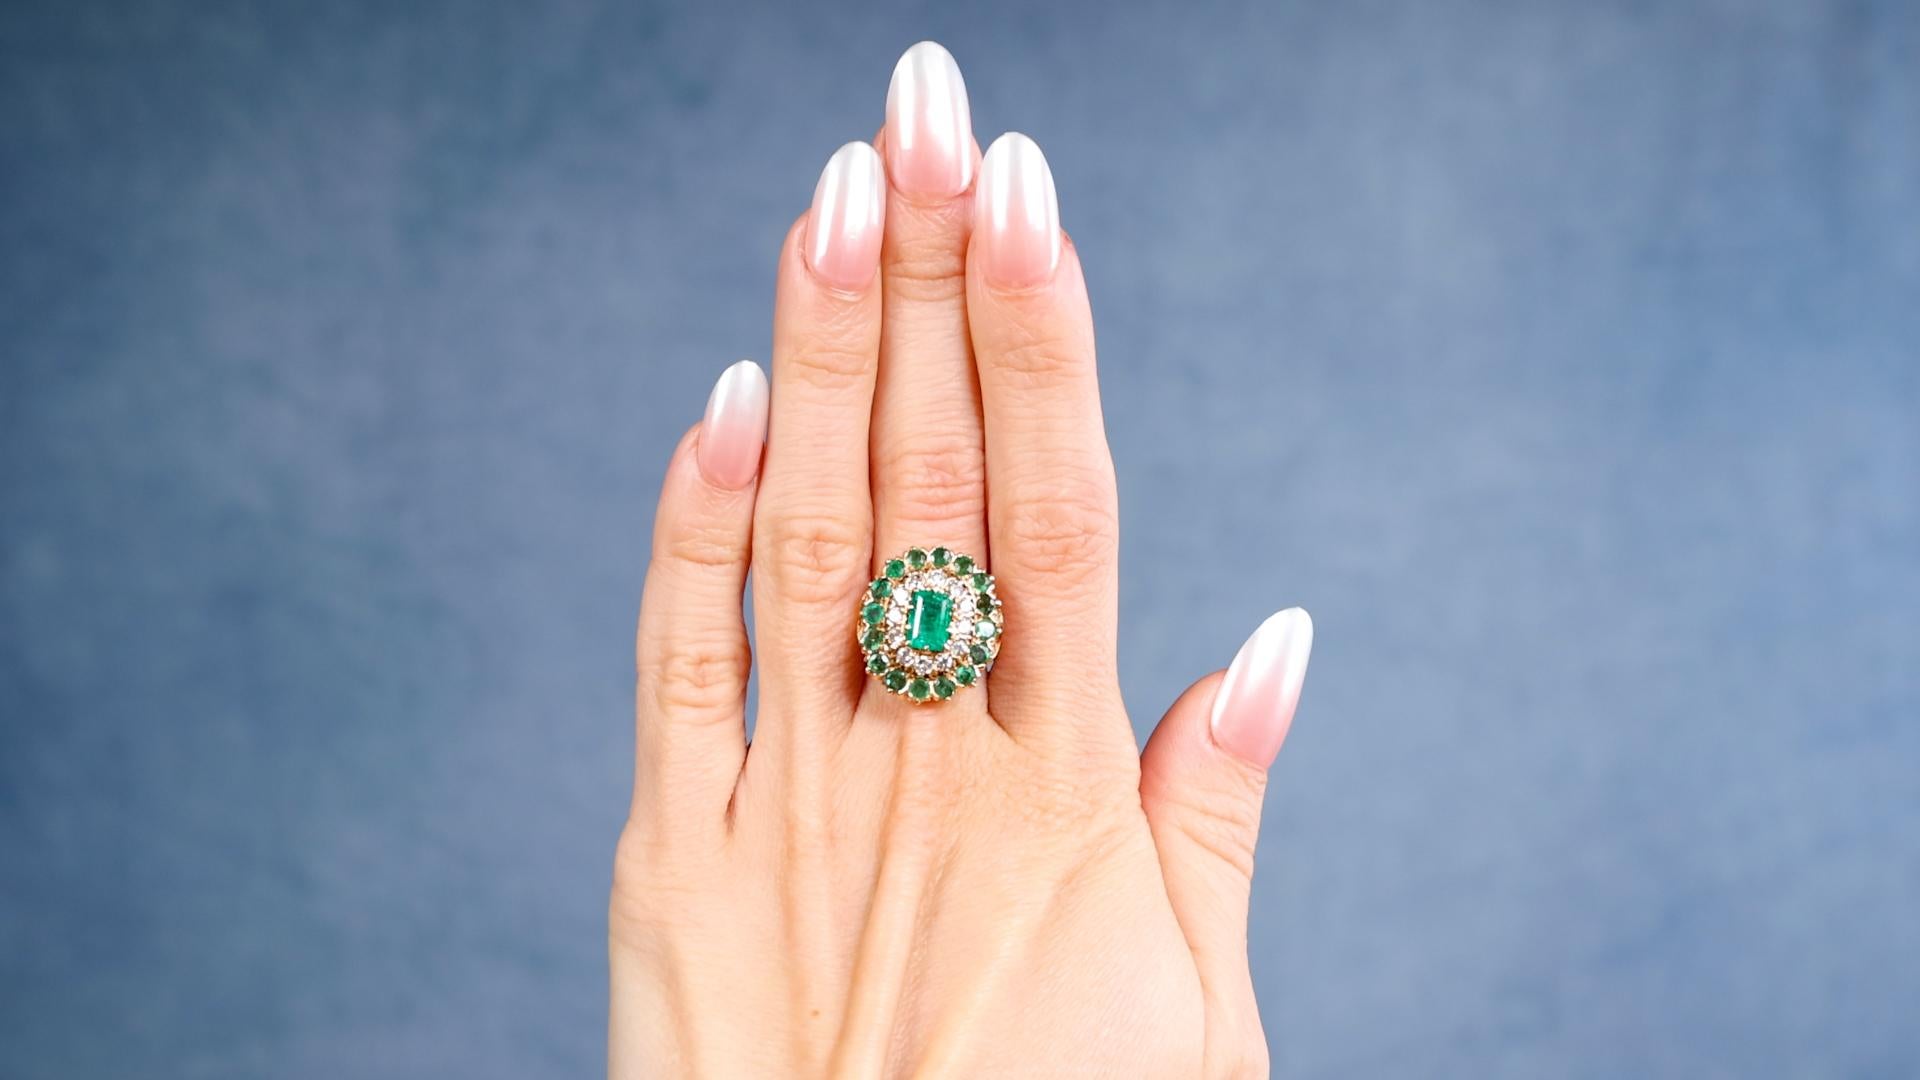 One Victorian Revival Emerald Diamond 14k Yellow Gold Cluster Ring. Featuring one octagonal step cut emerald weighing approximately 1.00 carat. Accented by 12 round brilliant cut diamonds with a total weight of approximately 0.80 carat, graded F-G